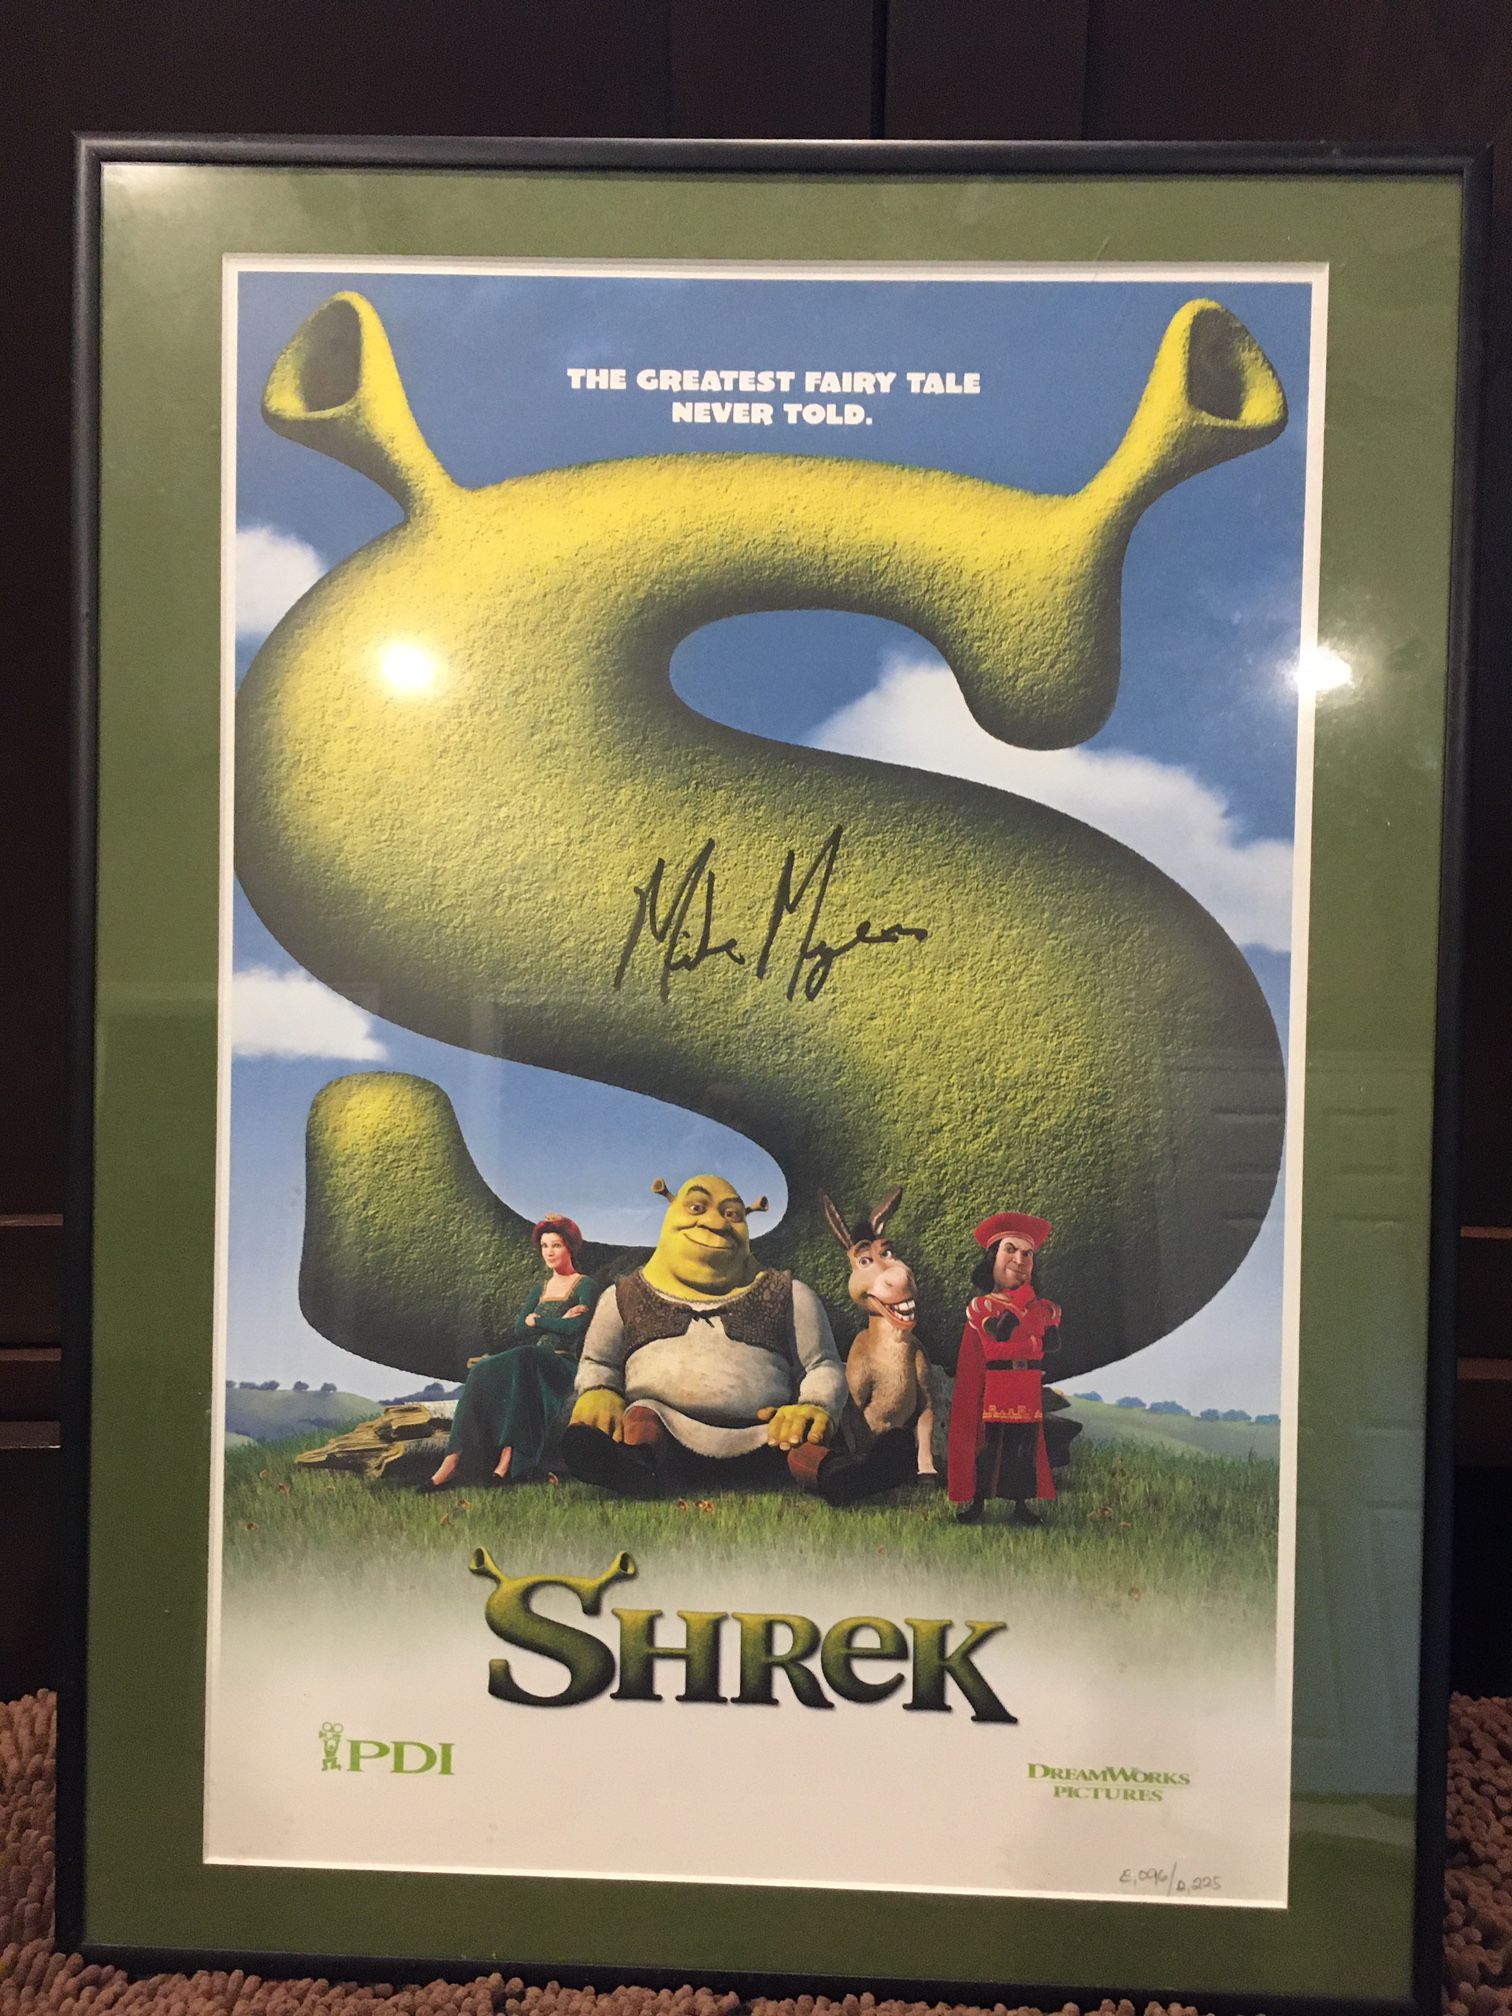 Original Shrek Movie Poster Autographed by Mike Myers w/COA